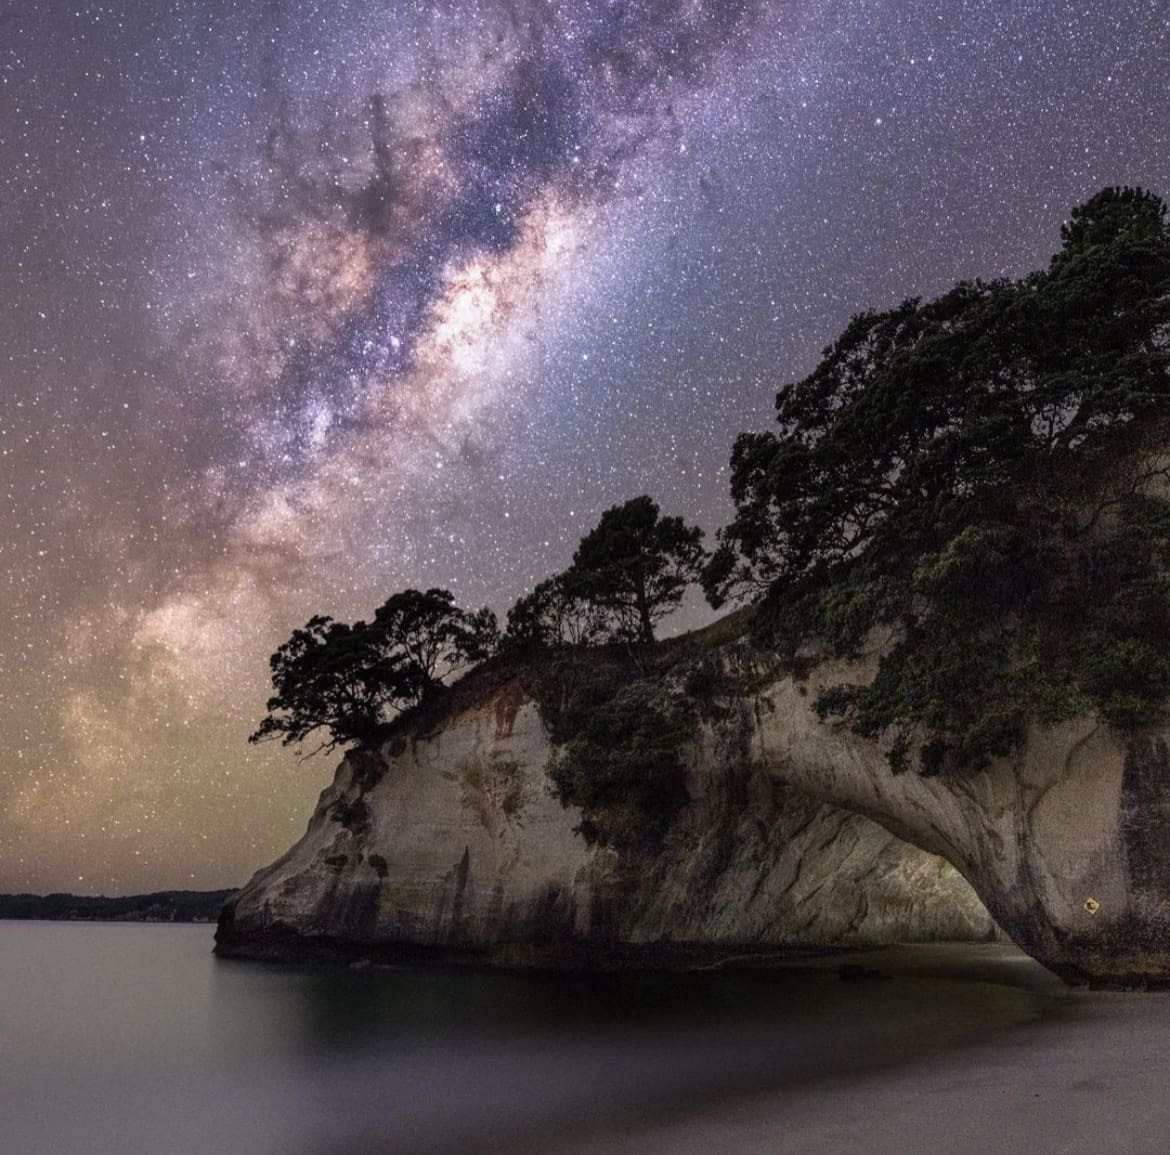 Cathedral Cove, New Zealand